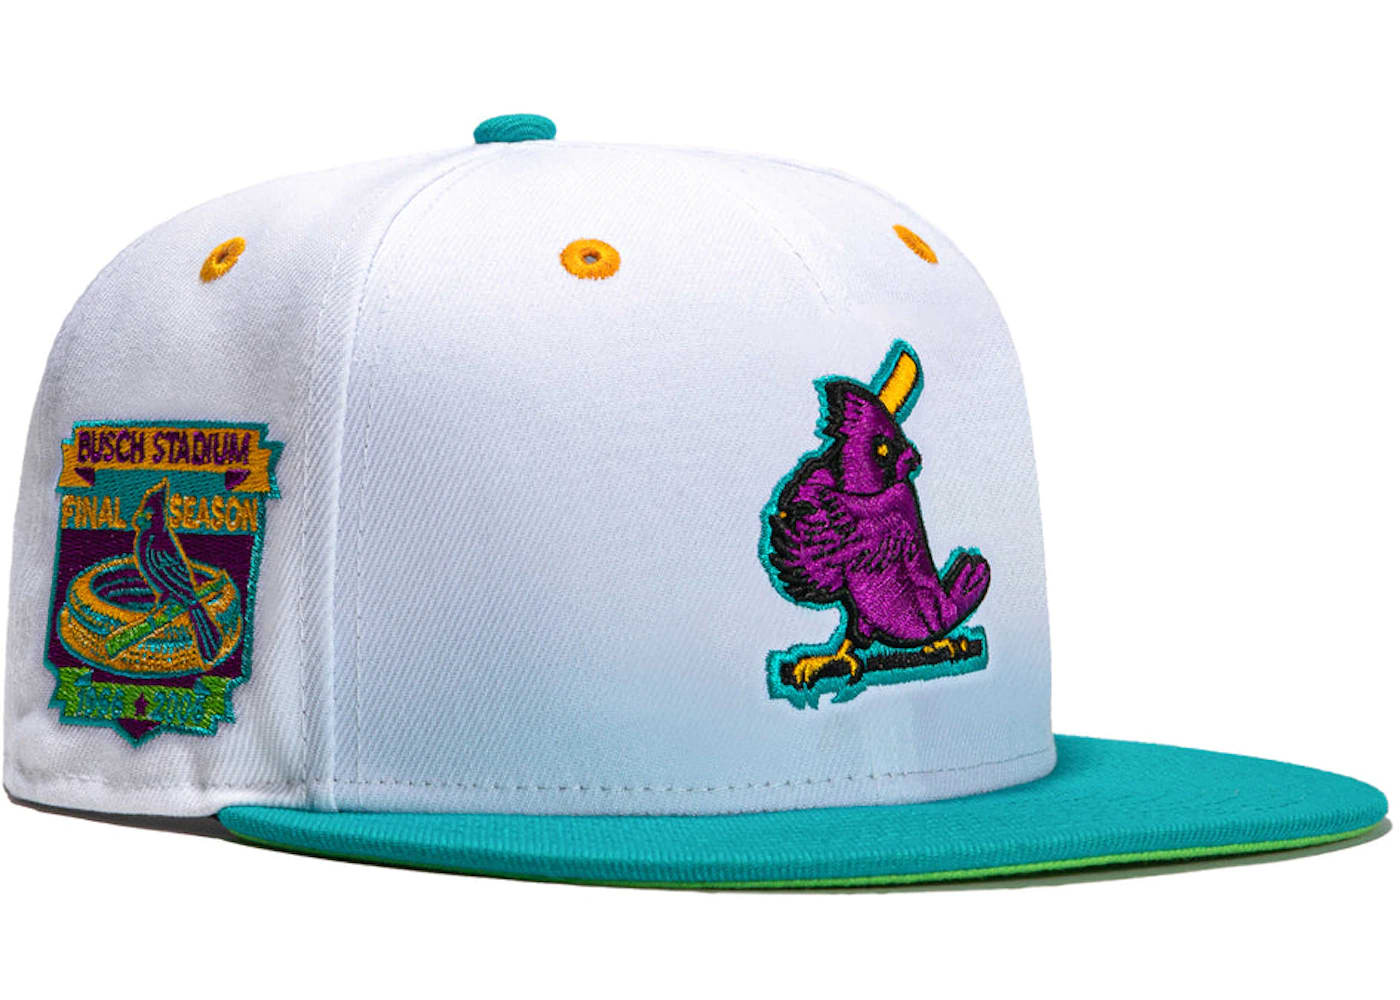 New Era St Louis Cardinals Dogtown Final Season Patch Hat Club Exclusive 59Fifty Fitted Hat White/Teal